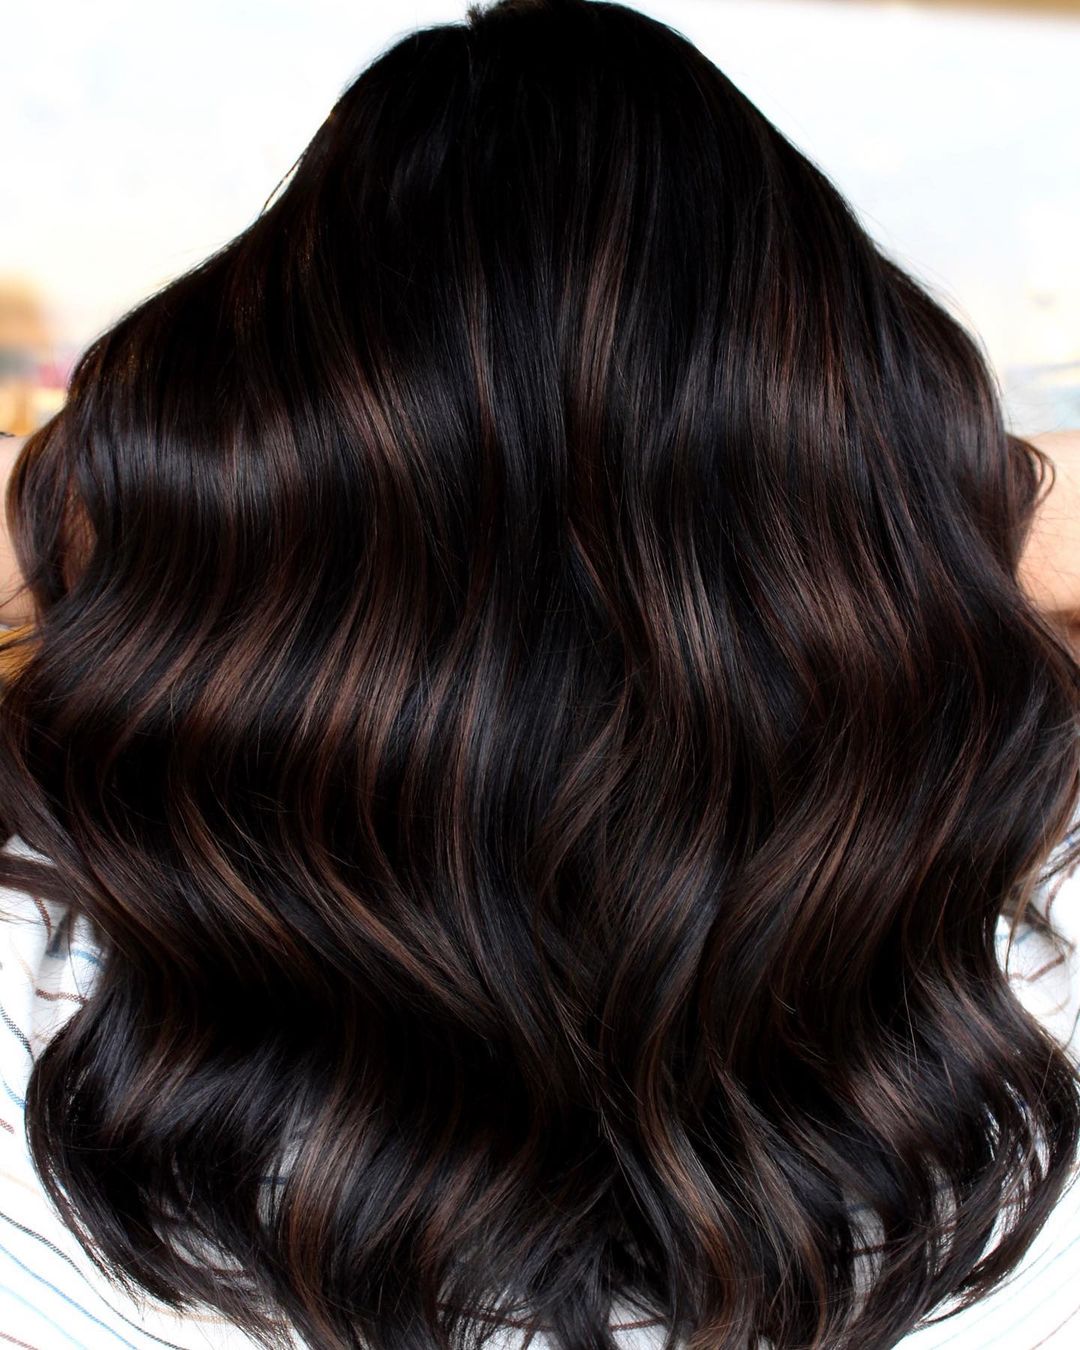 25+ Chocolate Brown Hair Colour Ideas To Add A Dash Of Glamm To Your Look!